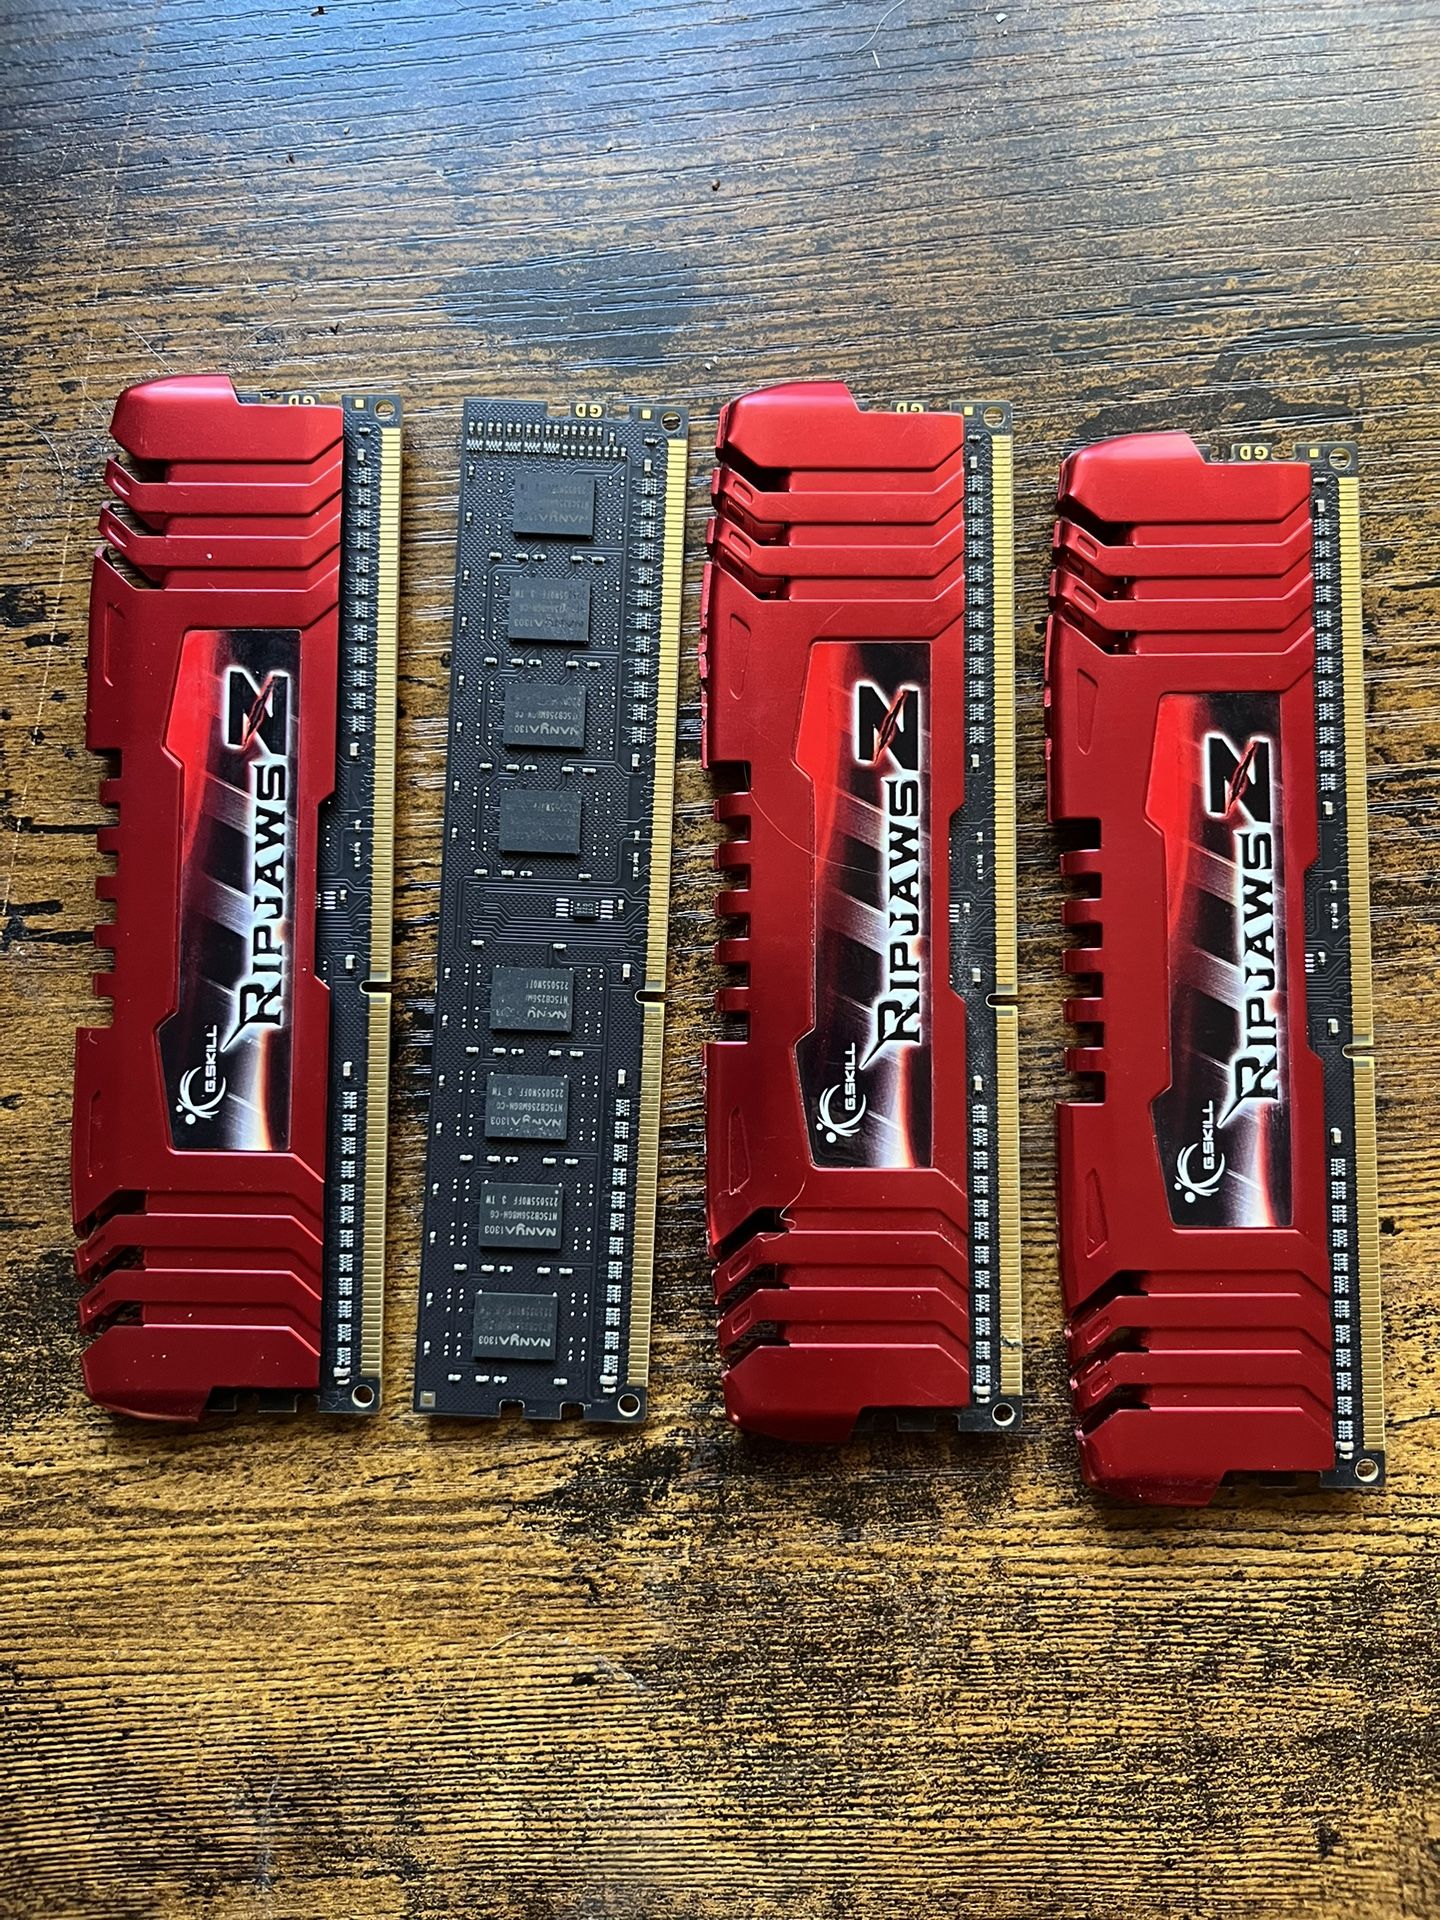 Ram For Pc